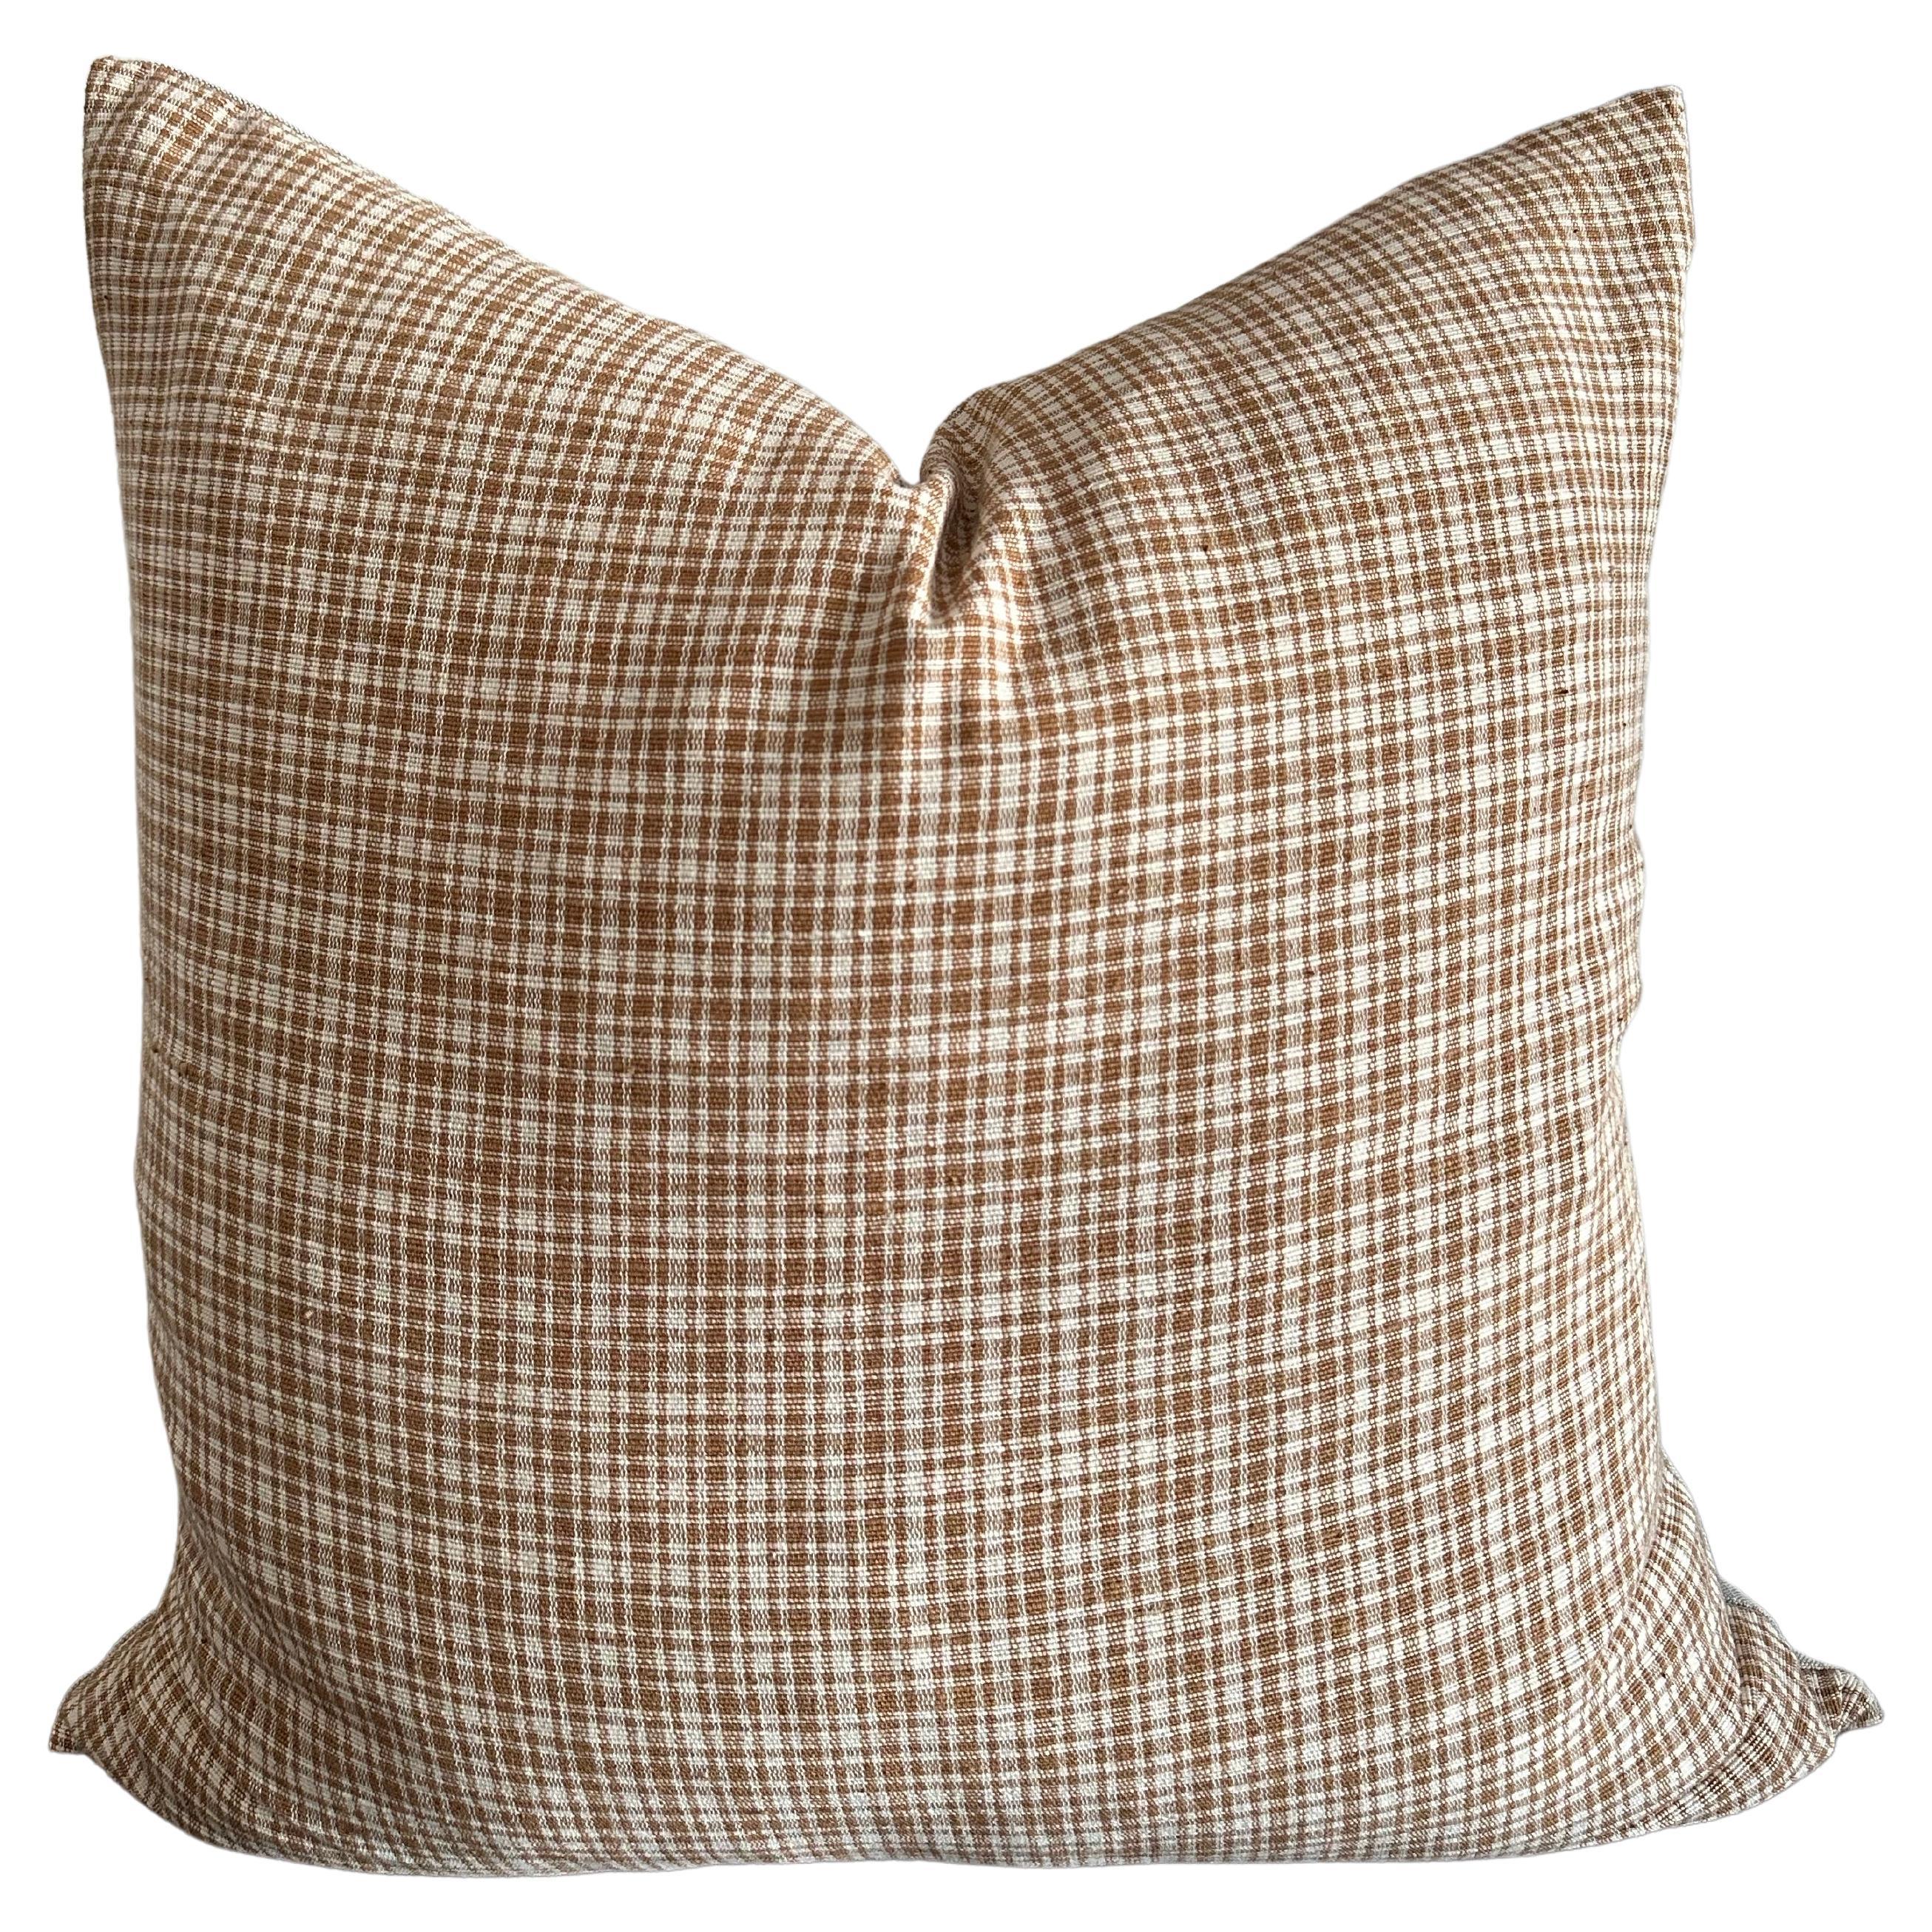 Tiburon Woven Brown Plaid Pillow with Down Feather Insert